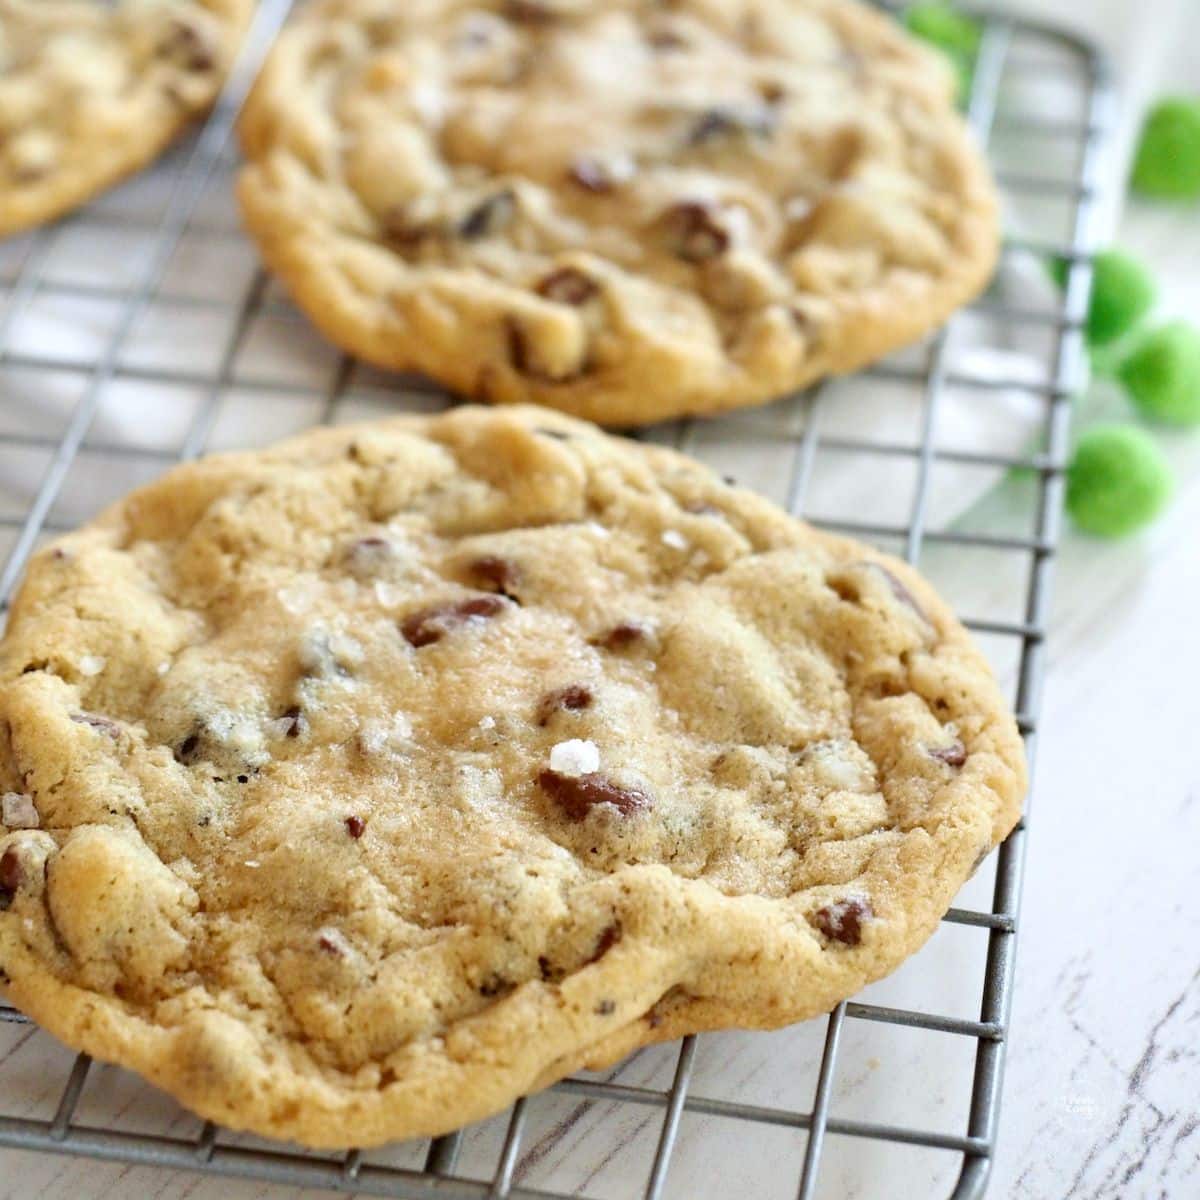 Chewy chocolate chip cookies.